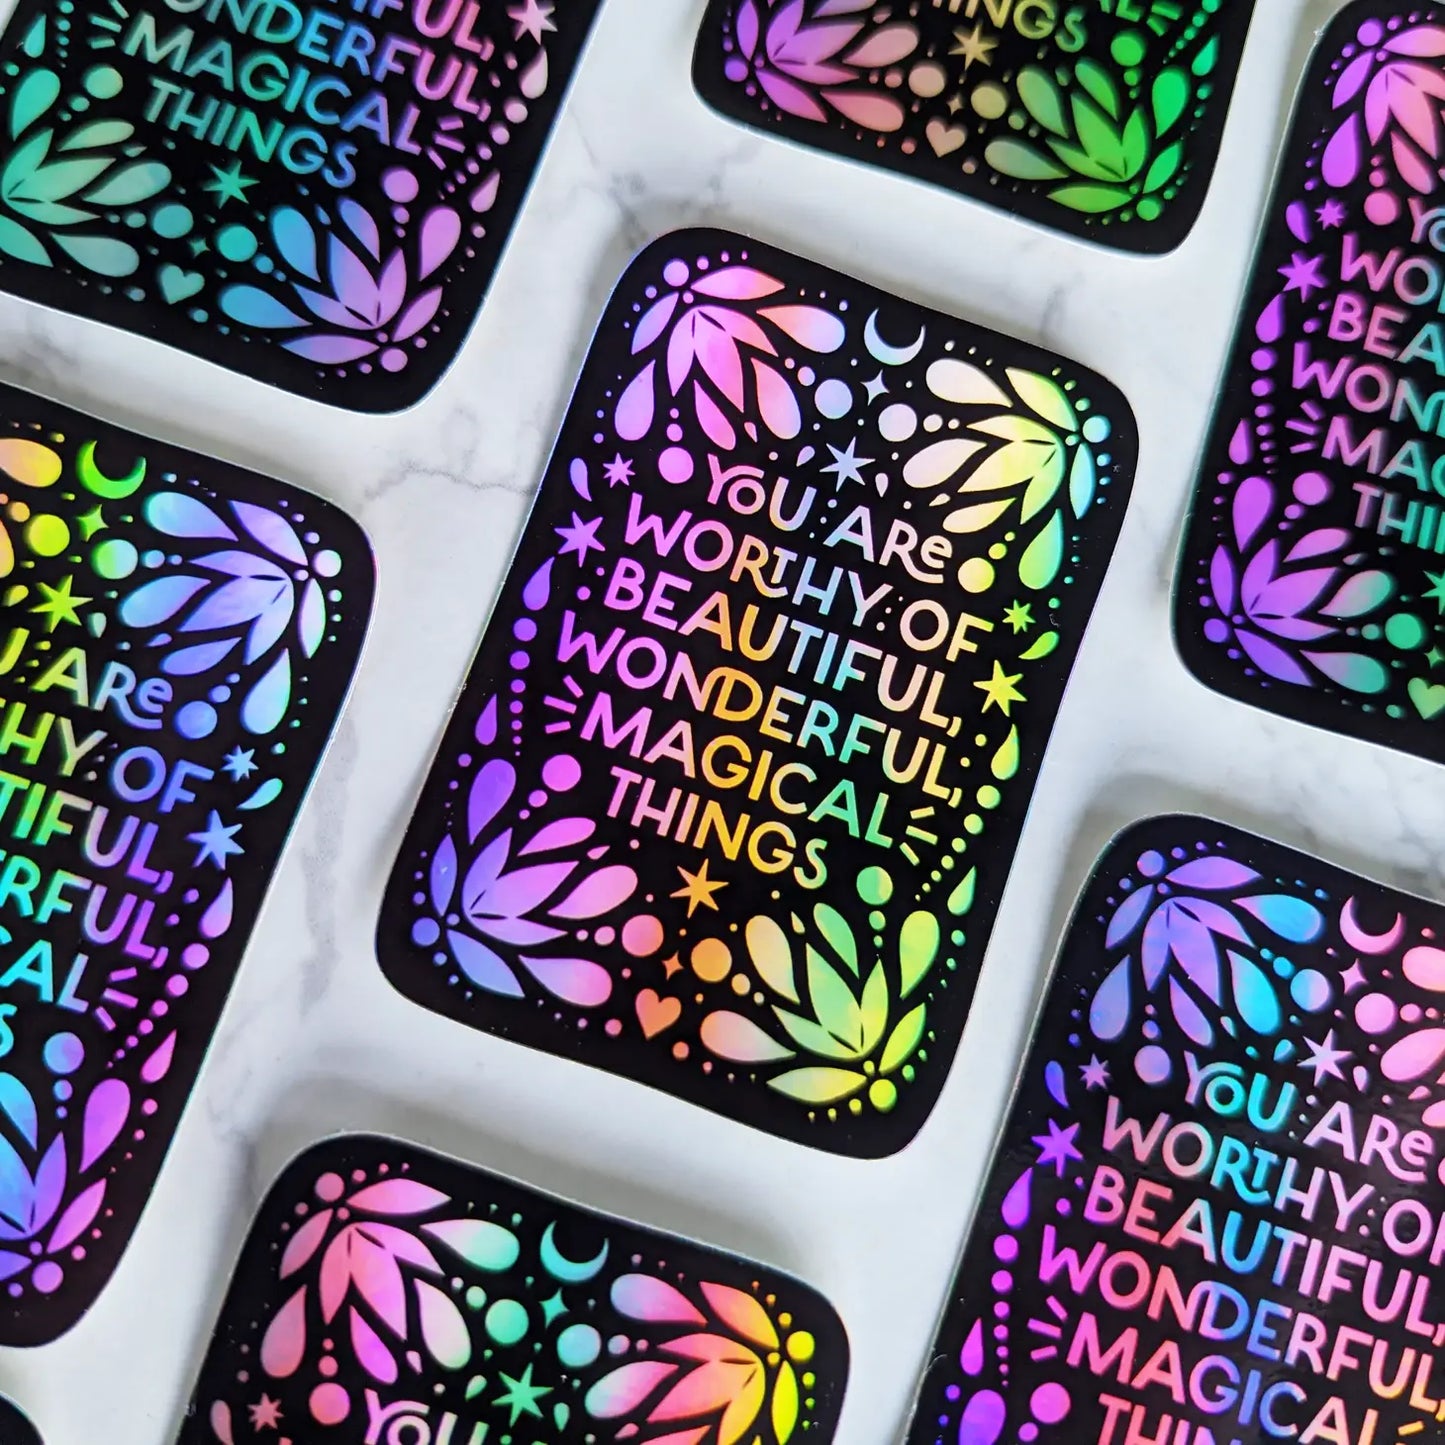 You Are Worthy Of Beautiful, Wonderful, Magical Things Sticker (Black Holographic)